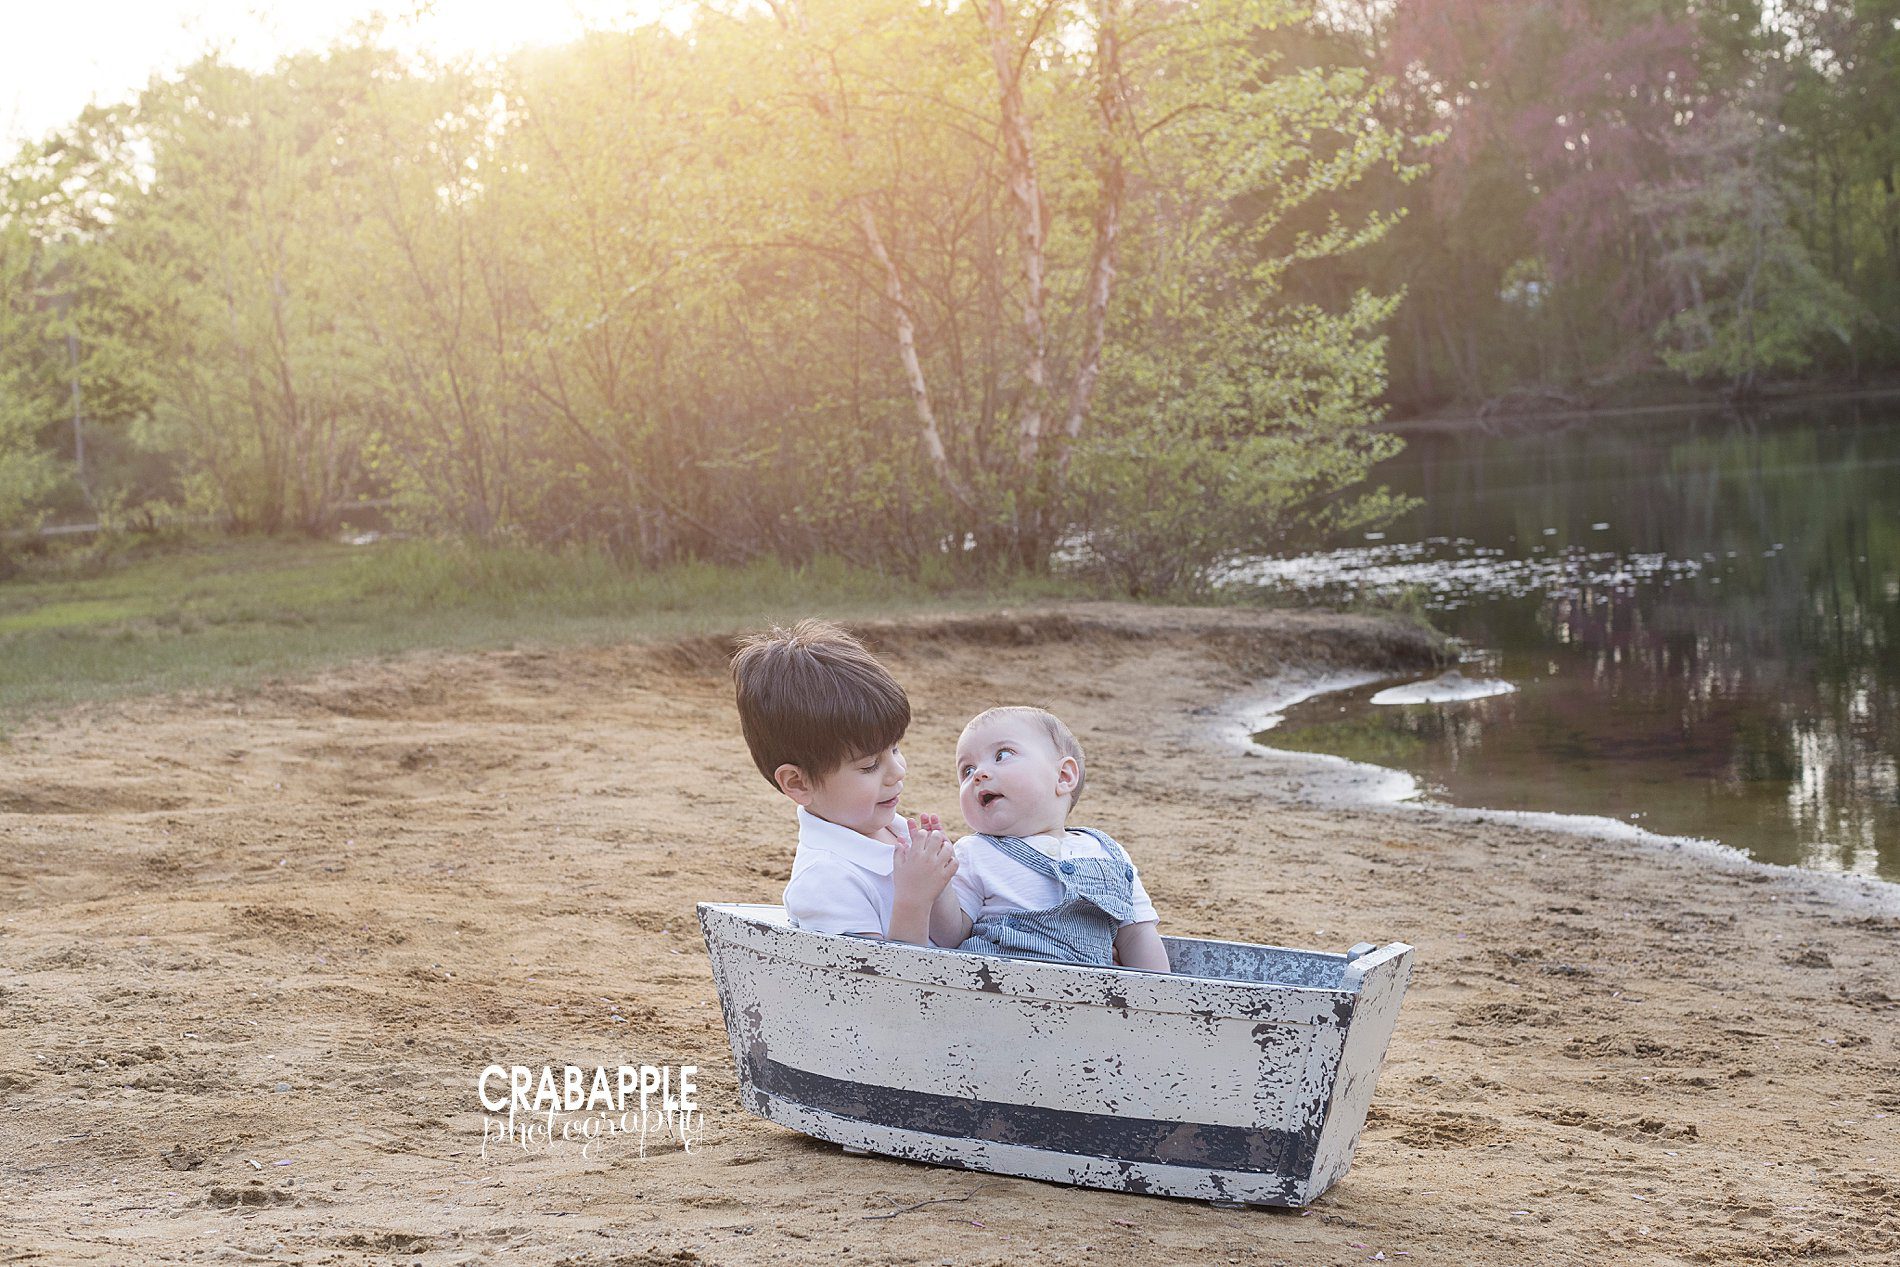 Brother photos using a tiny vintage inspired boat prop on the banks of a lake.